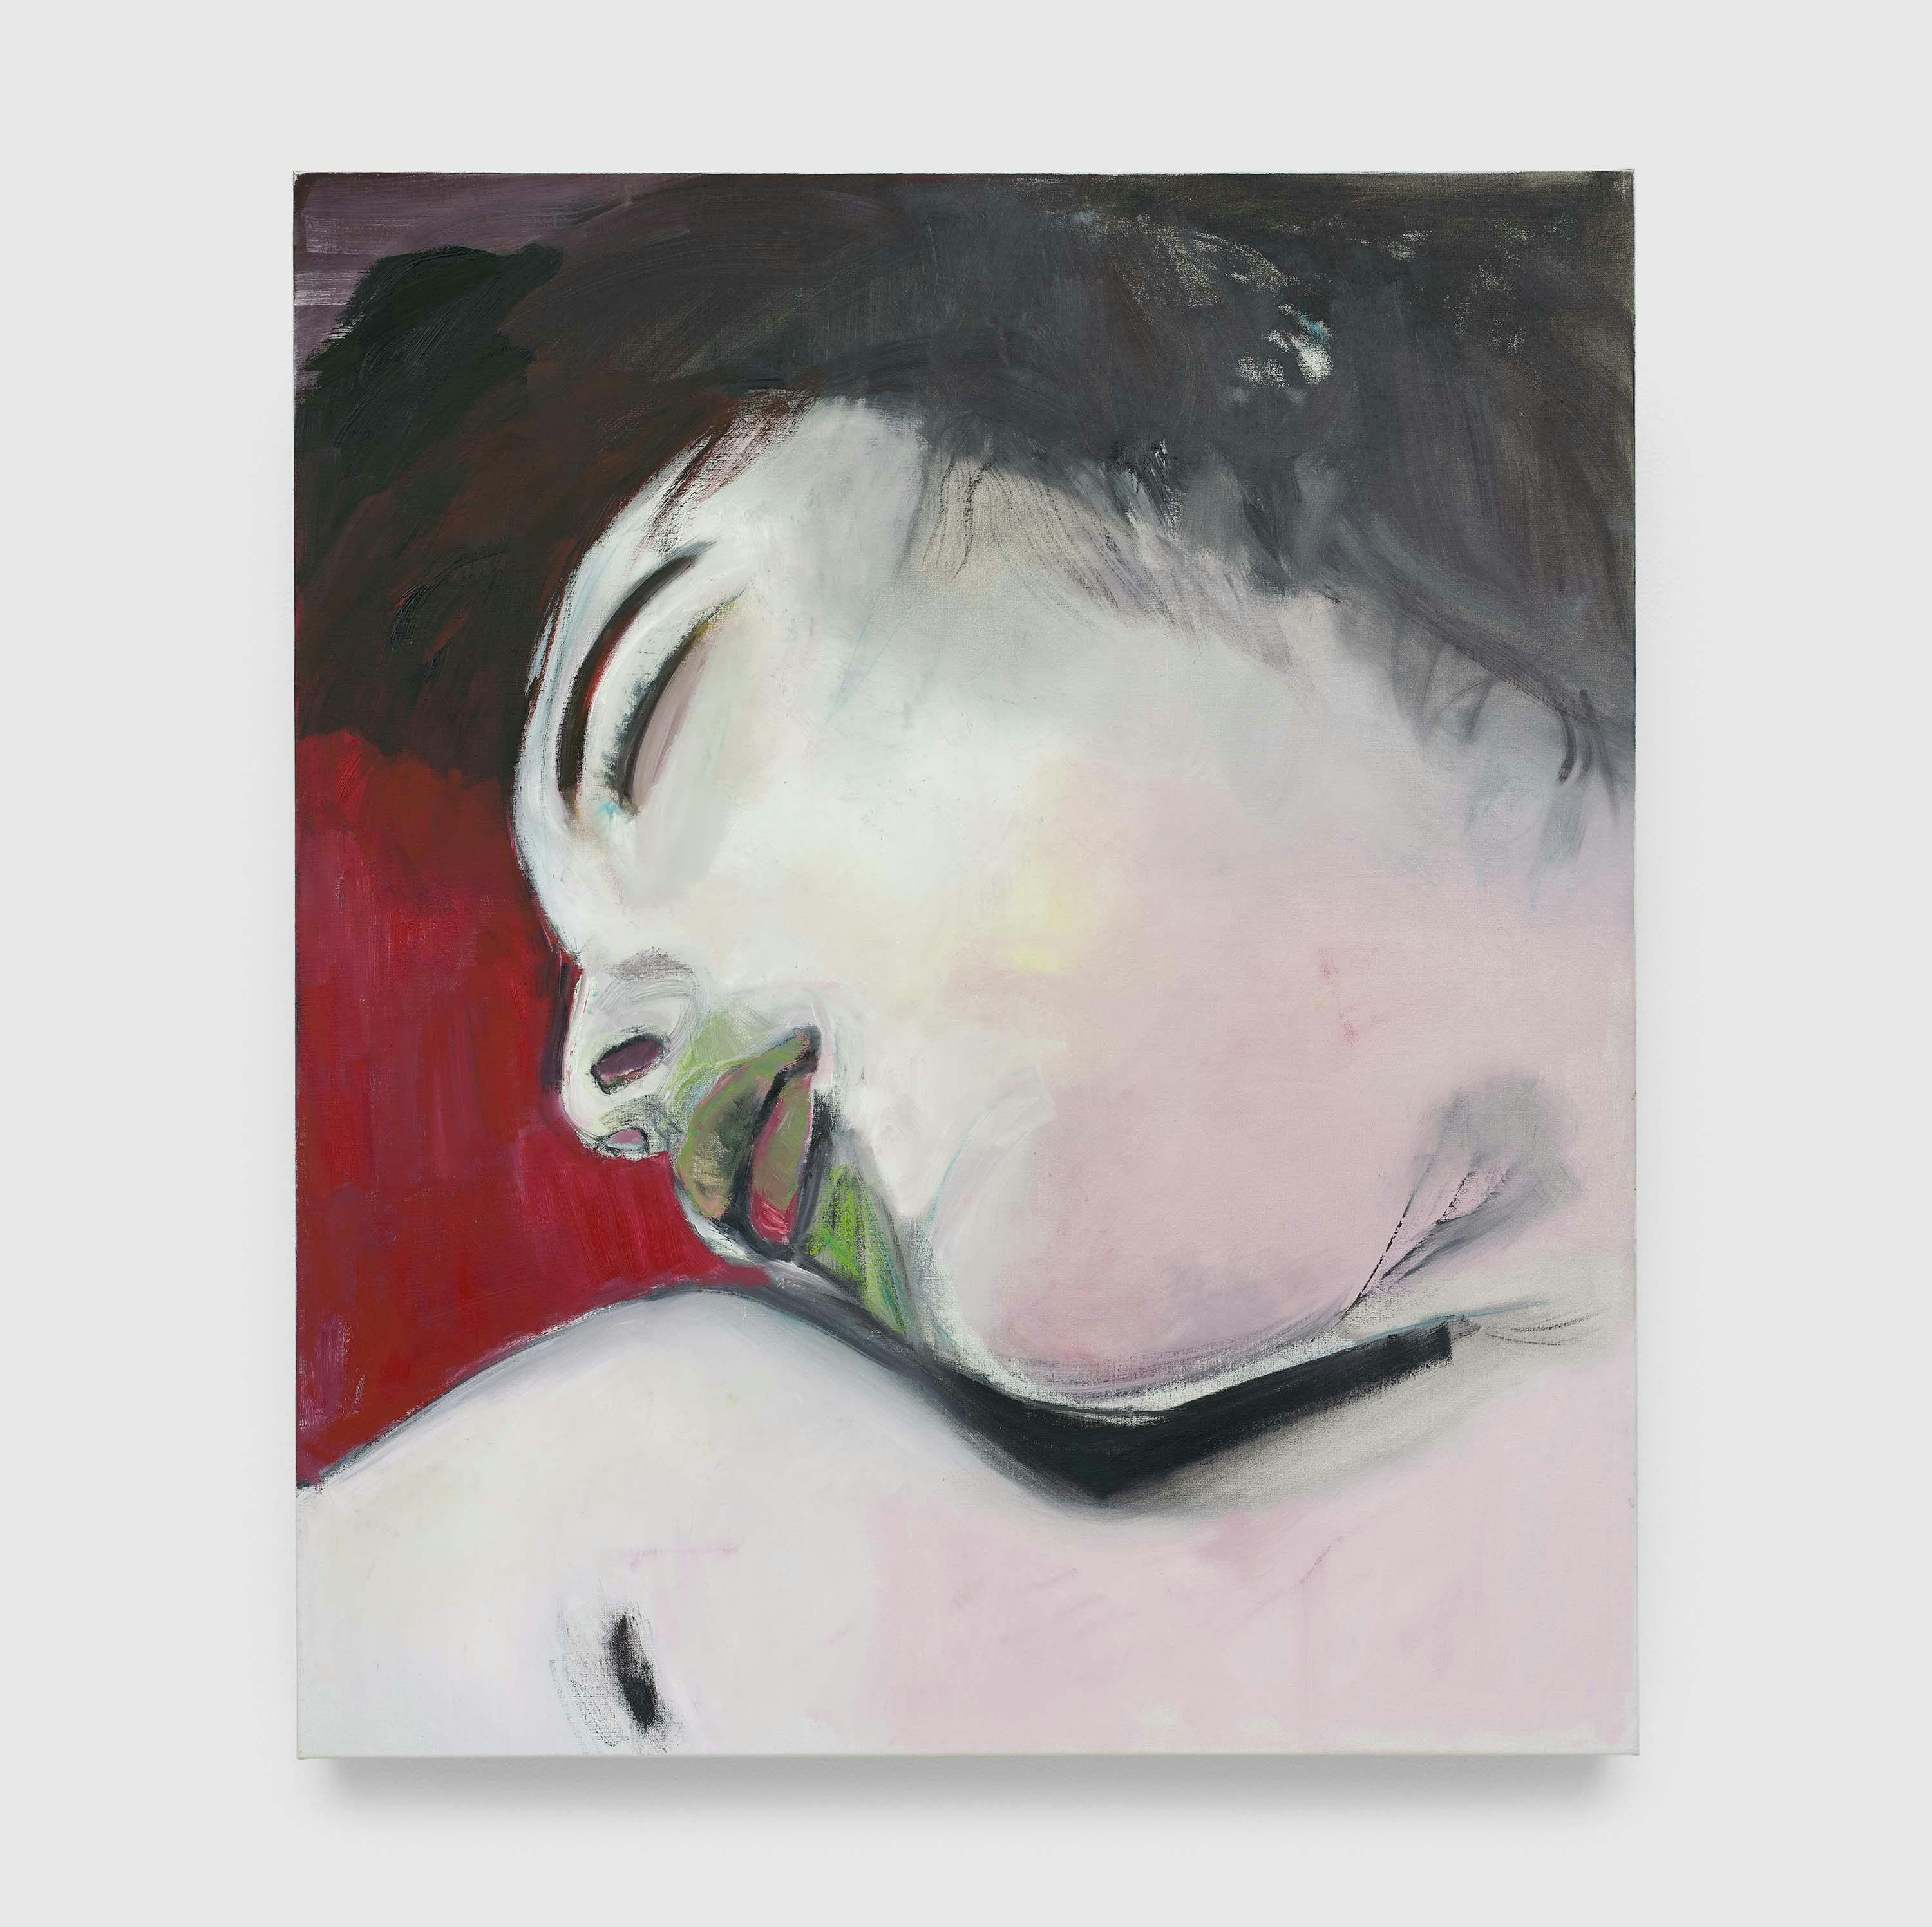 A painting by Marlene Dumas, titled Broken White, dated 2006.